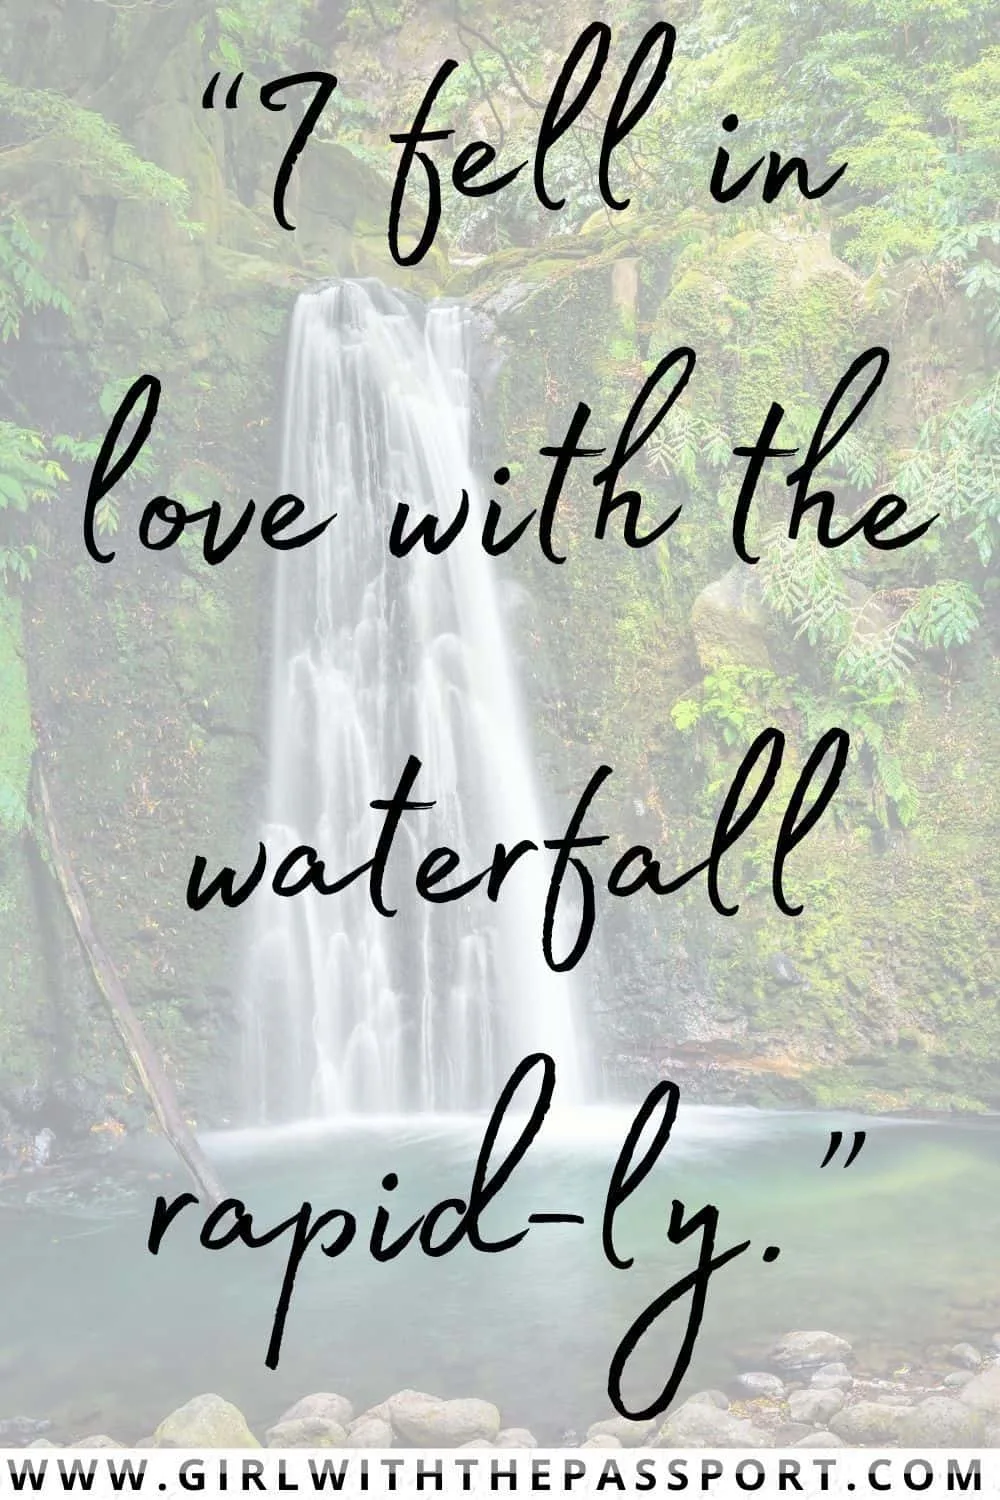 Waterfall Puns and Funny Quotes about Waterfalls